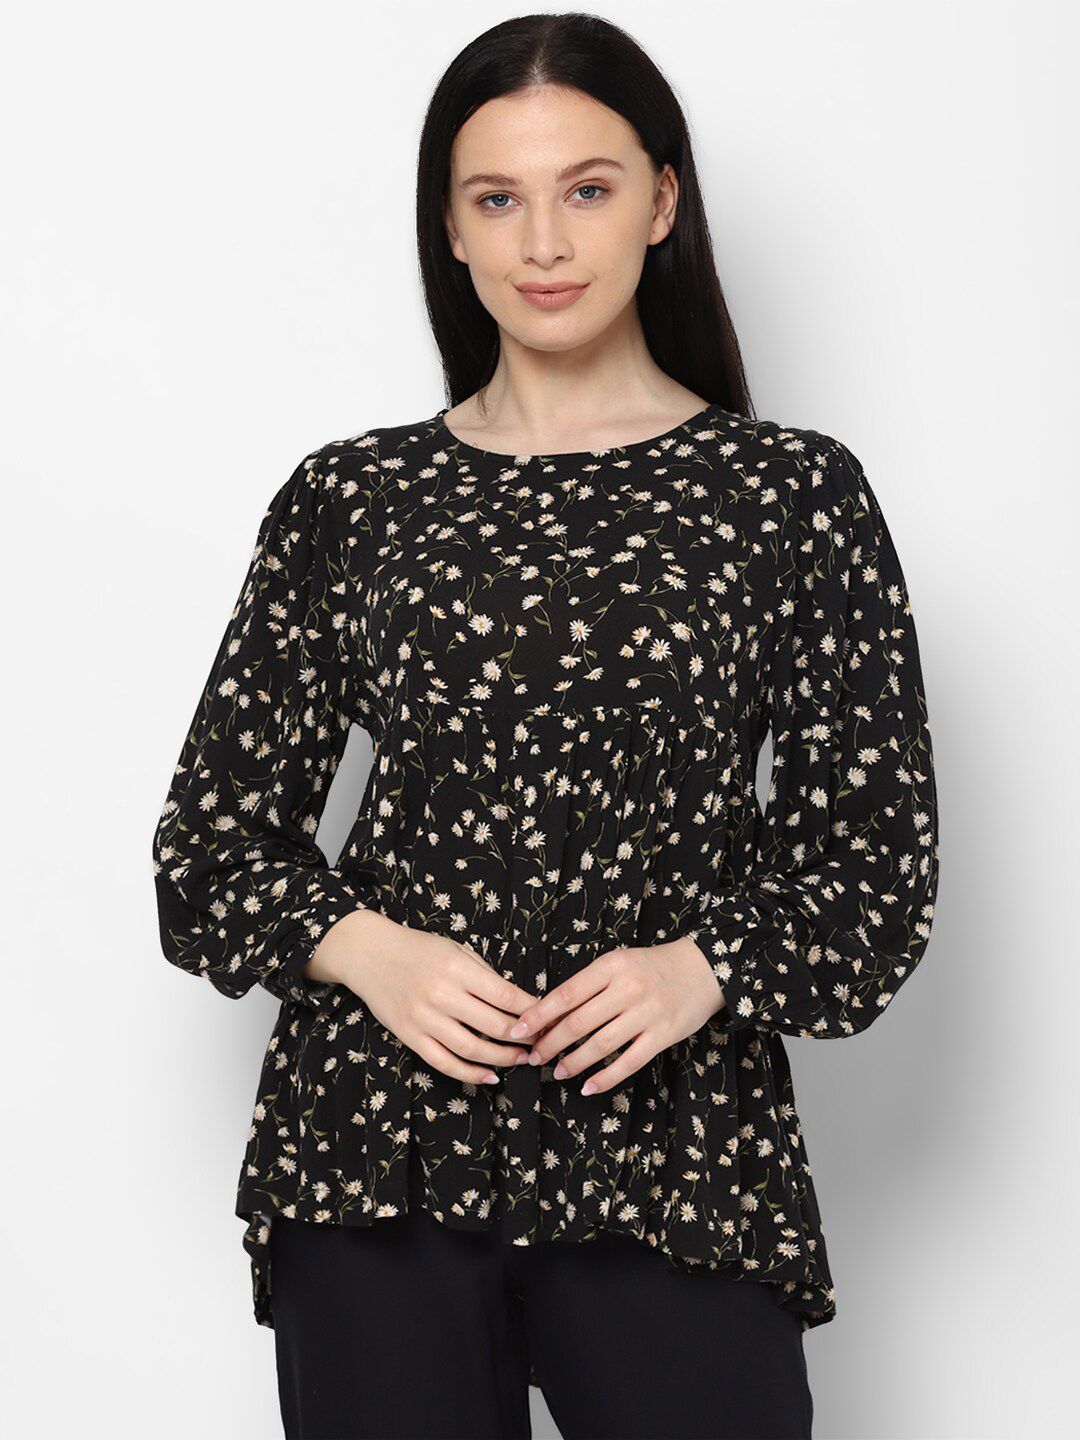 AMERICAN EAGLE OUTFITTERS Women Black Floral Empire Top Price in India